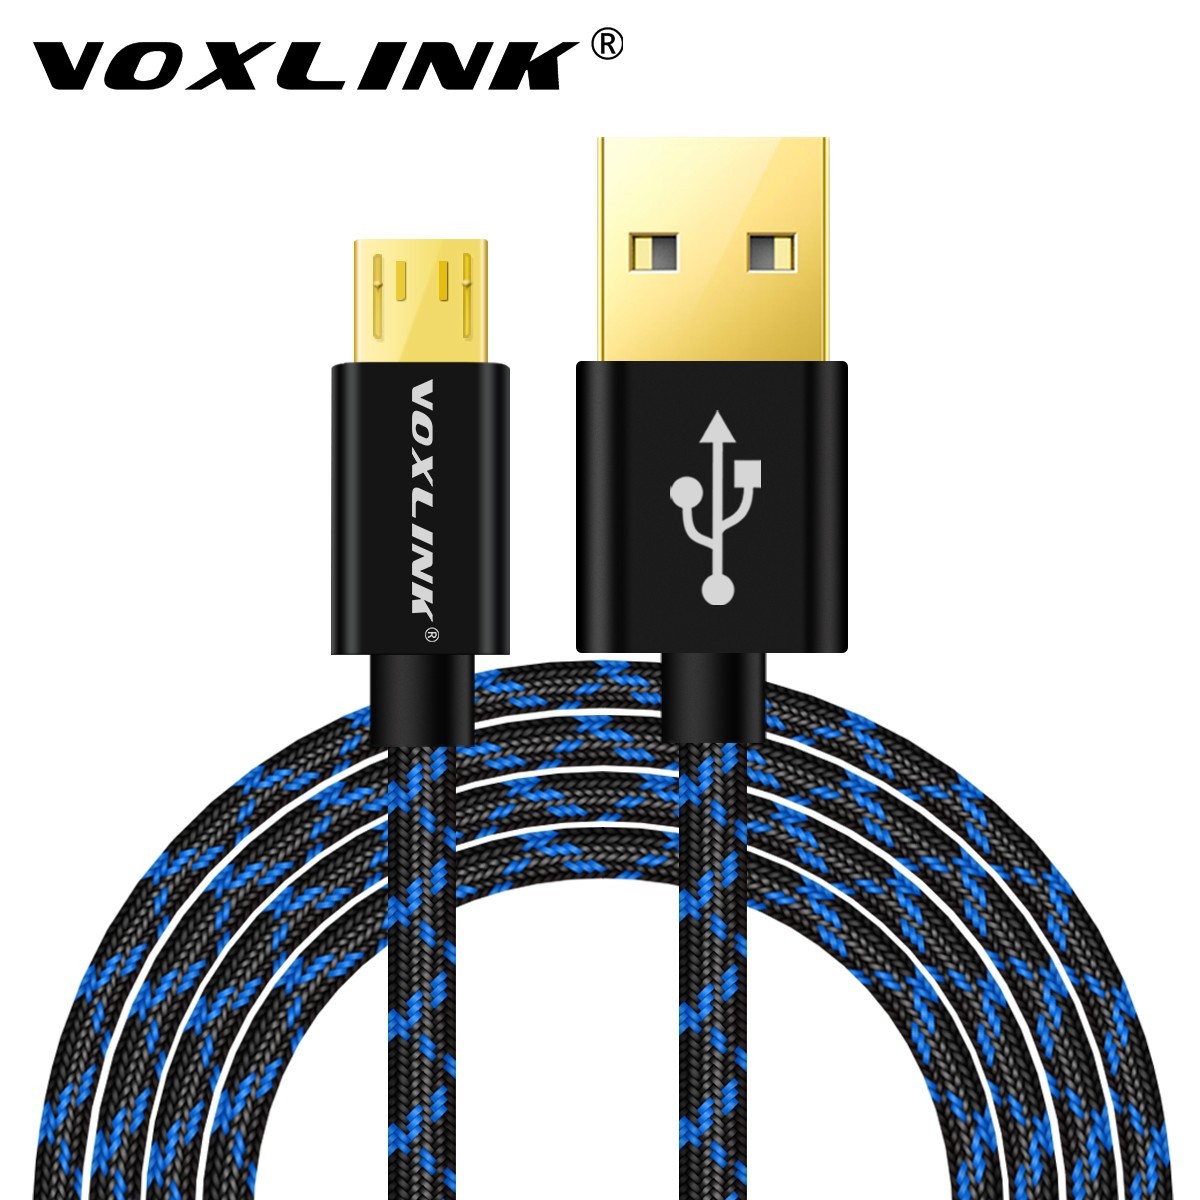 VOXLINK NEW 2.4A V word 1M Micro USB Cable Nylon USB Charger Data Cable For Samsung S6 S5 S4 Huawei Xiaomi LG Mobile Phone-blue+black black